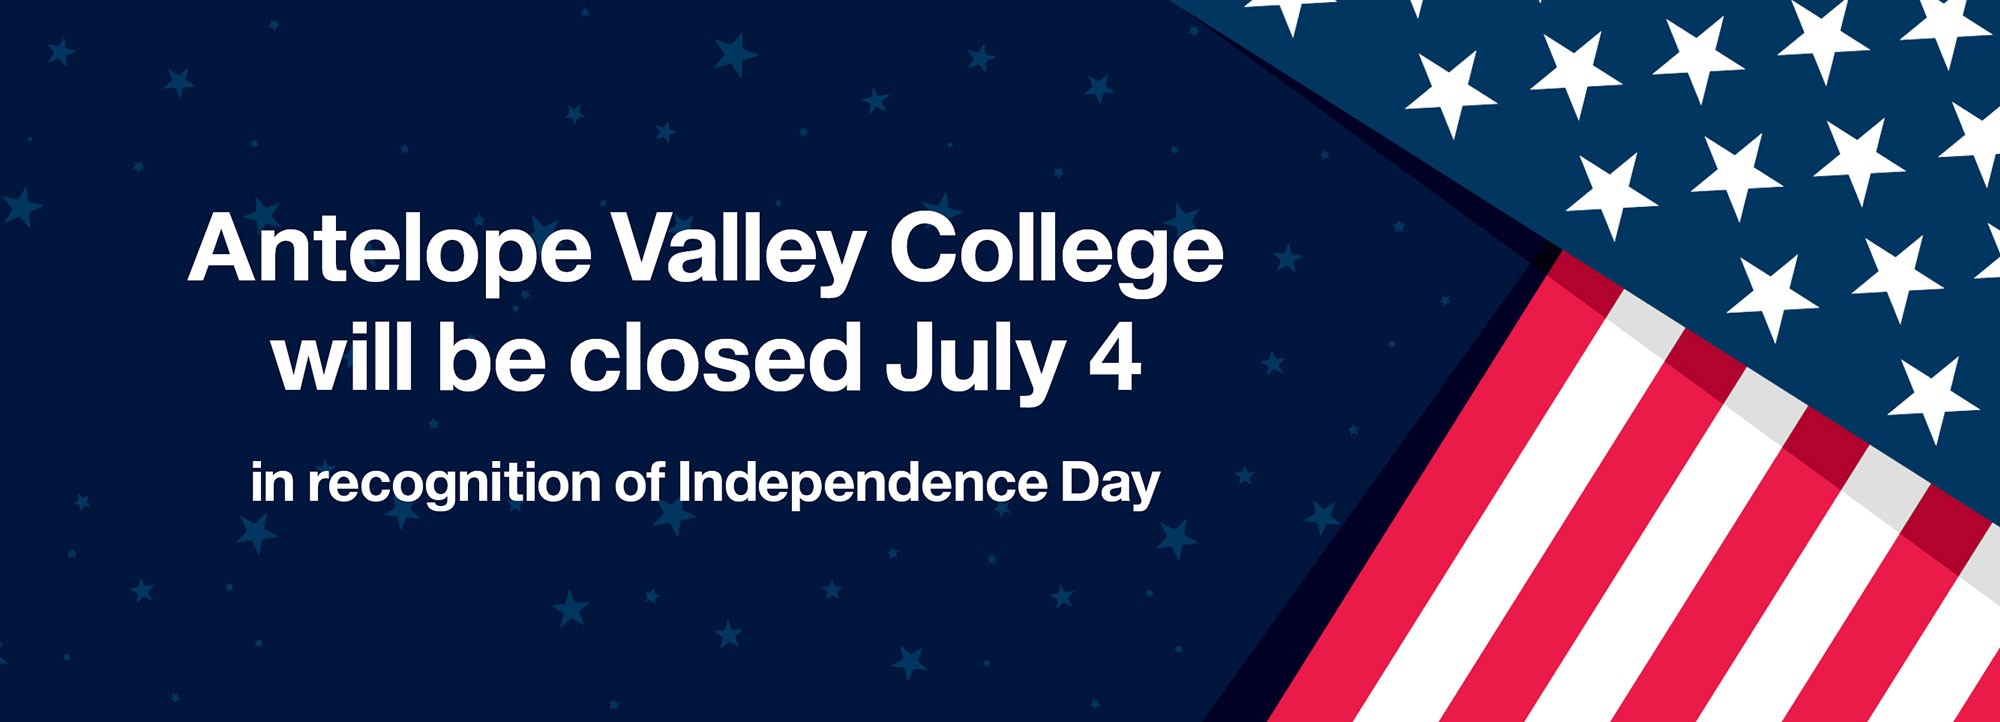 Antelope Valley College will be closed July 4